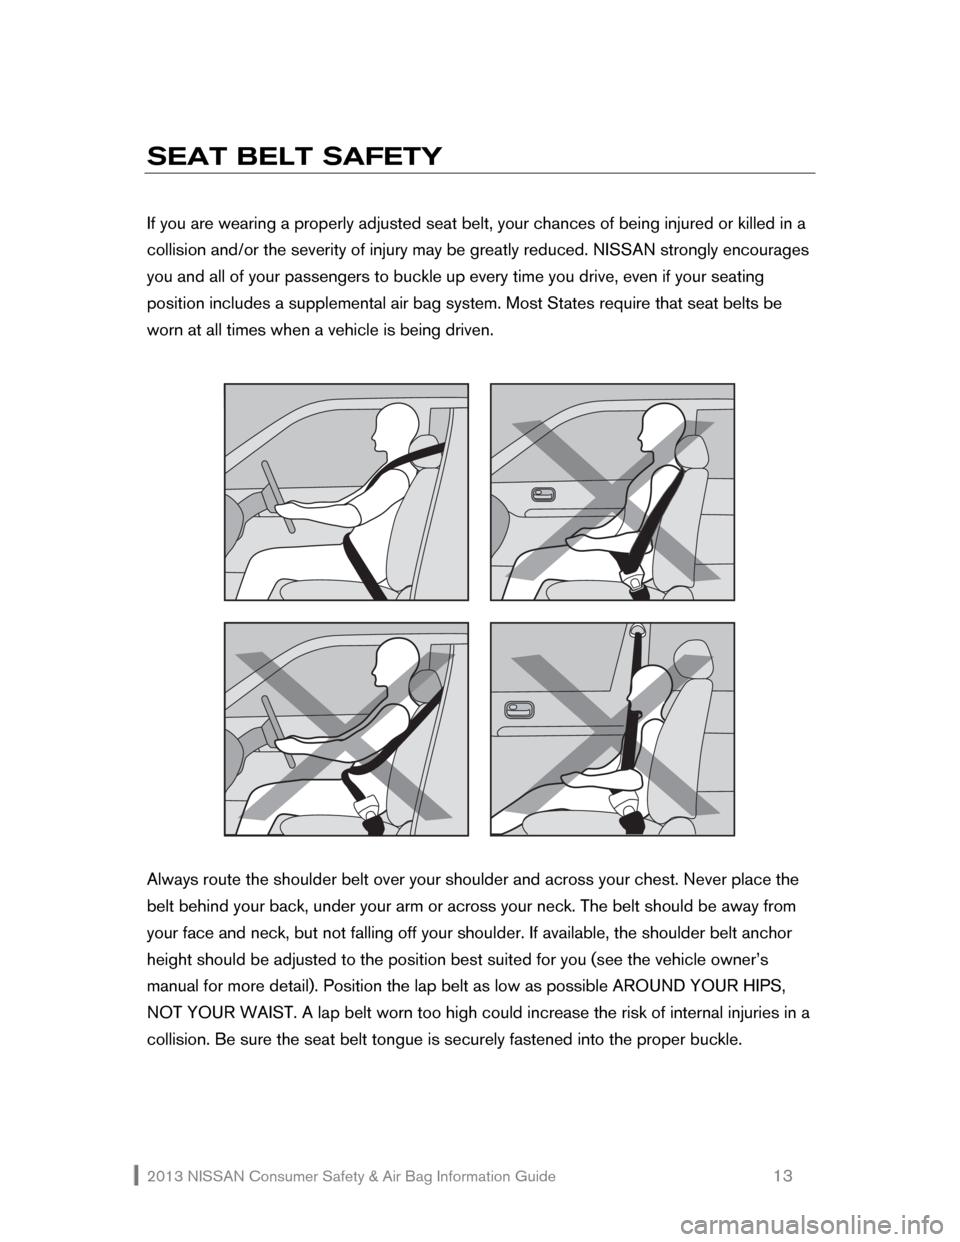 NISSAN FRONTIER 2013 D40 / 2.G Consumer Safety Air Bag Information Guide 2013 NISSAN Consumer Safety & Air Bag Information Guide                                                   13 
SEAT BELT SAFETY 
 
If you are wearing a properly adjusted seat belt, your chances of bein